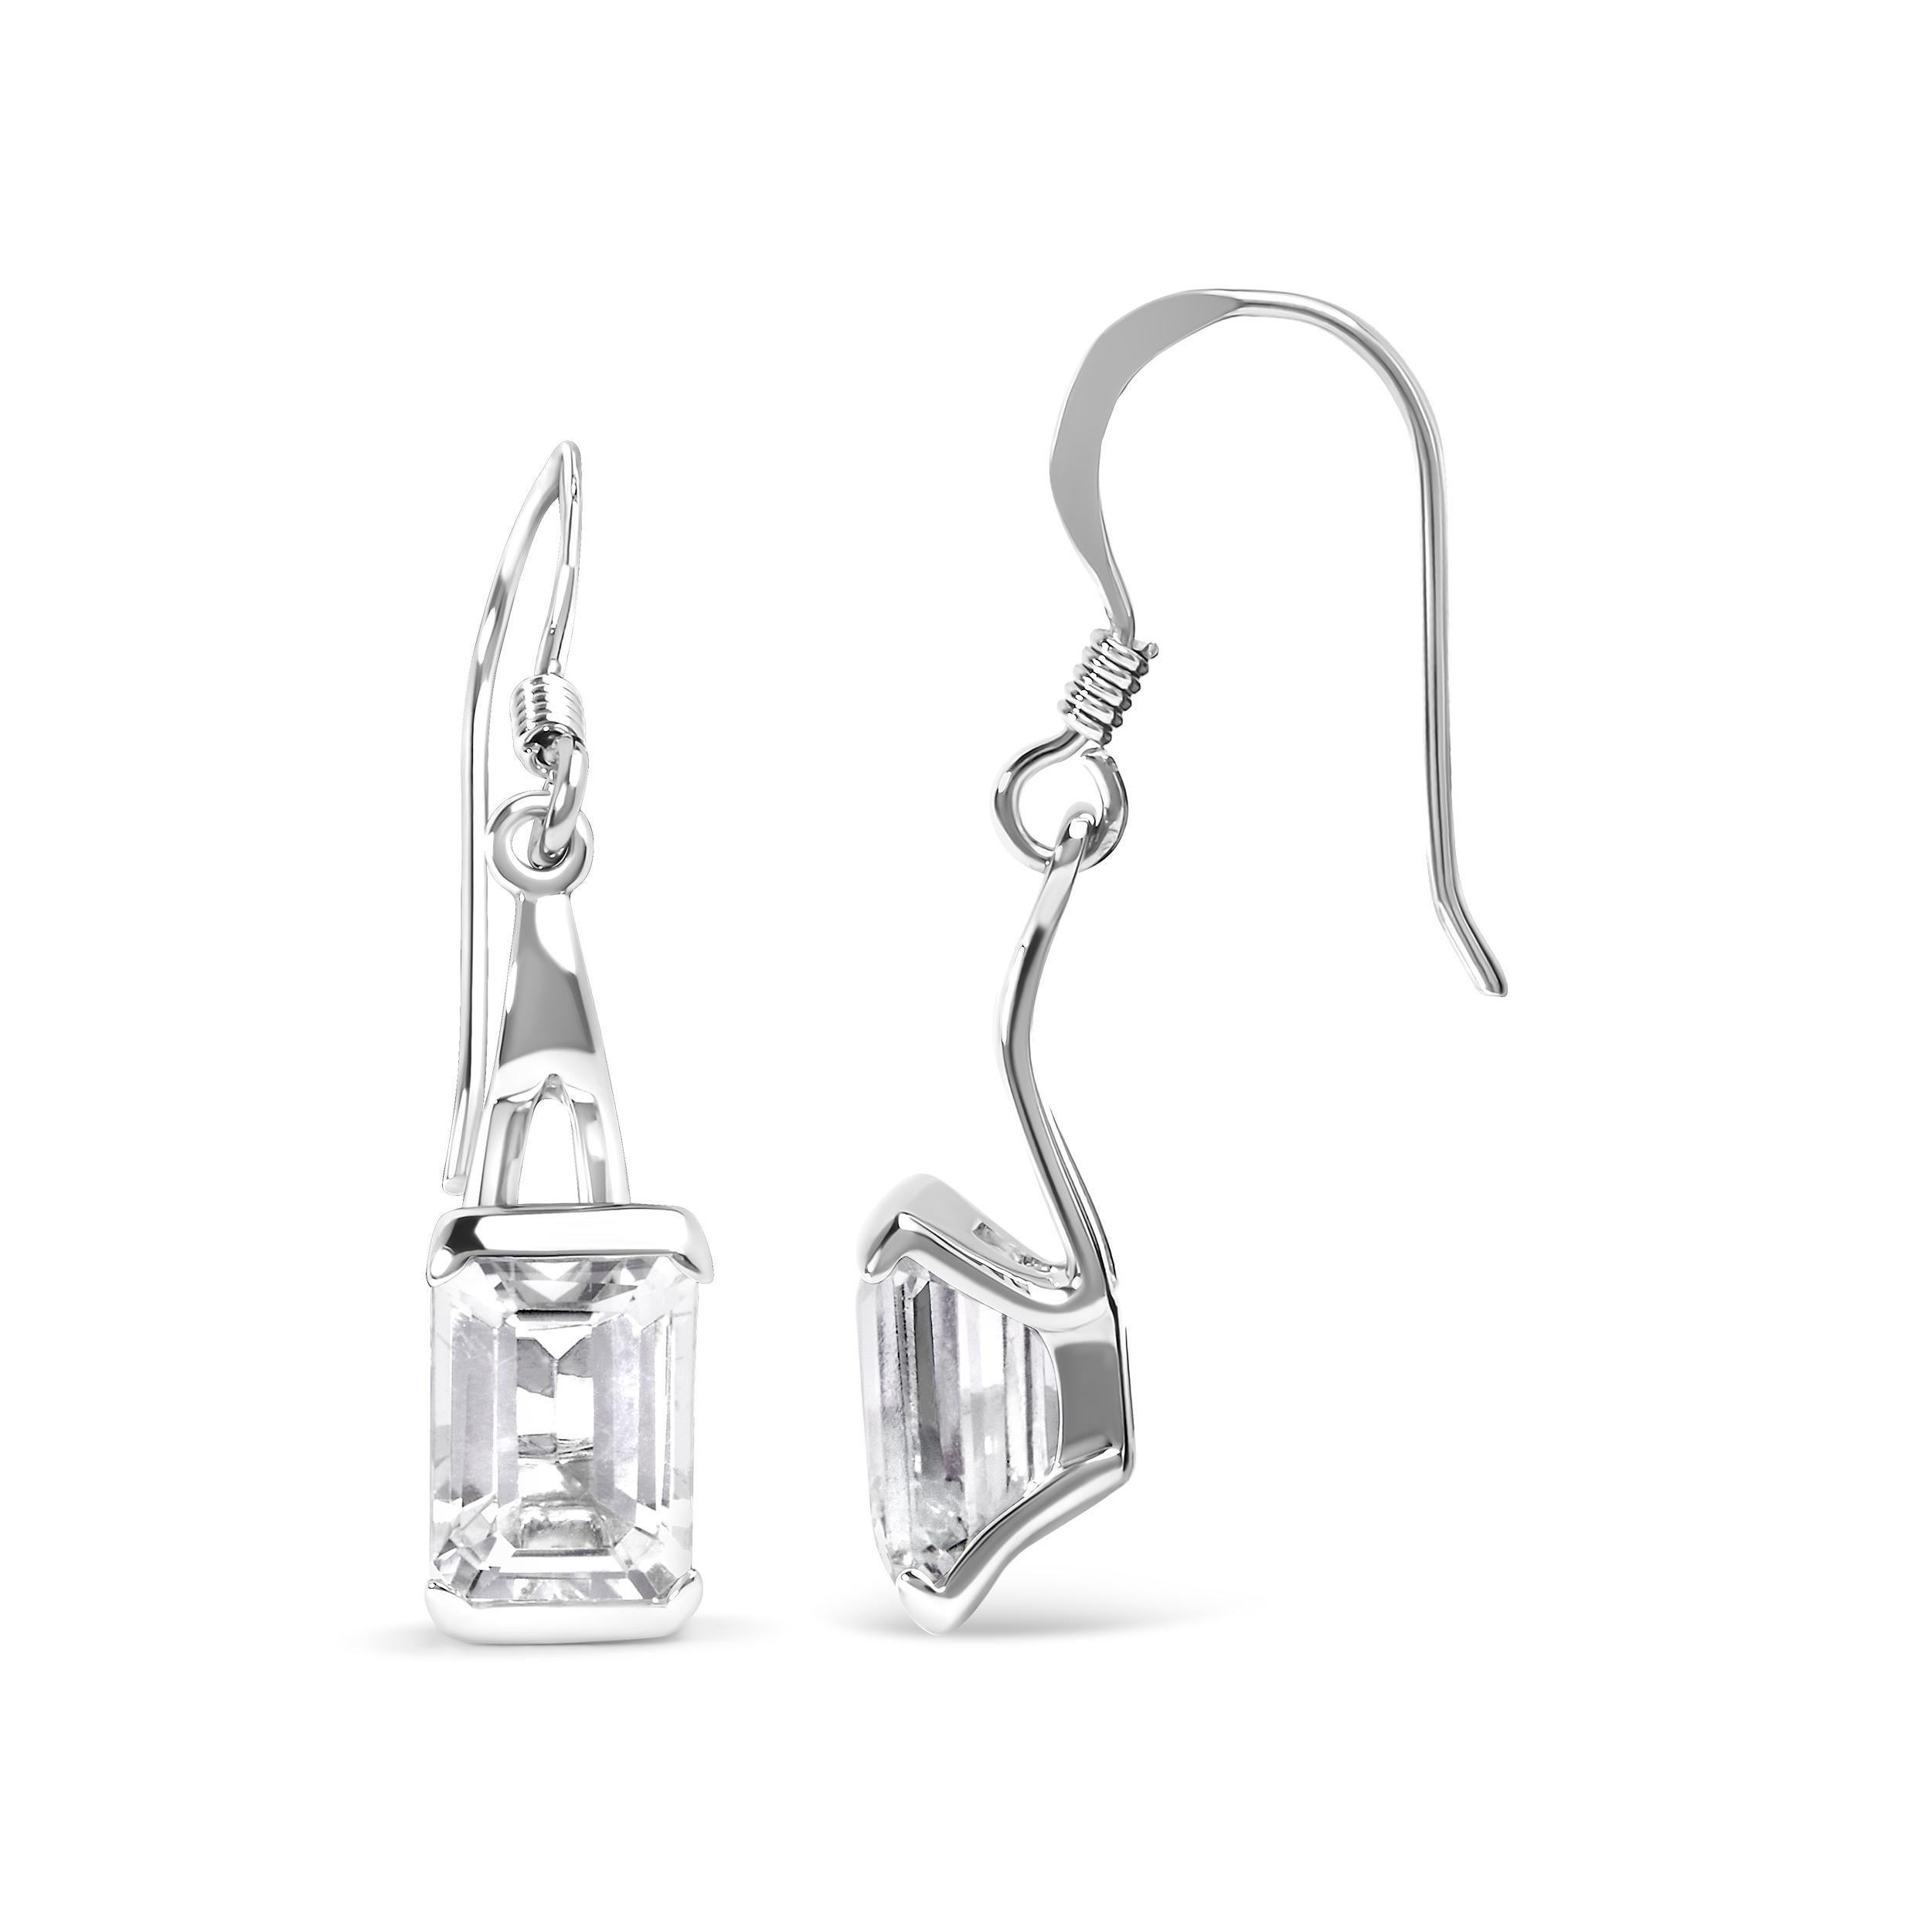 Contemporary .925 Sterling Silver 3.0 Carat Emerald Cut White Topaz Solitaire Dangle Earring